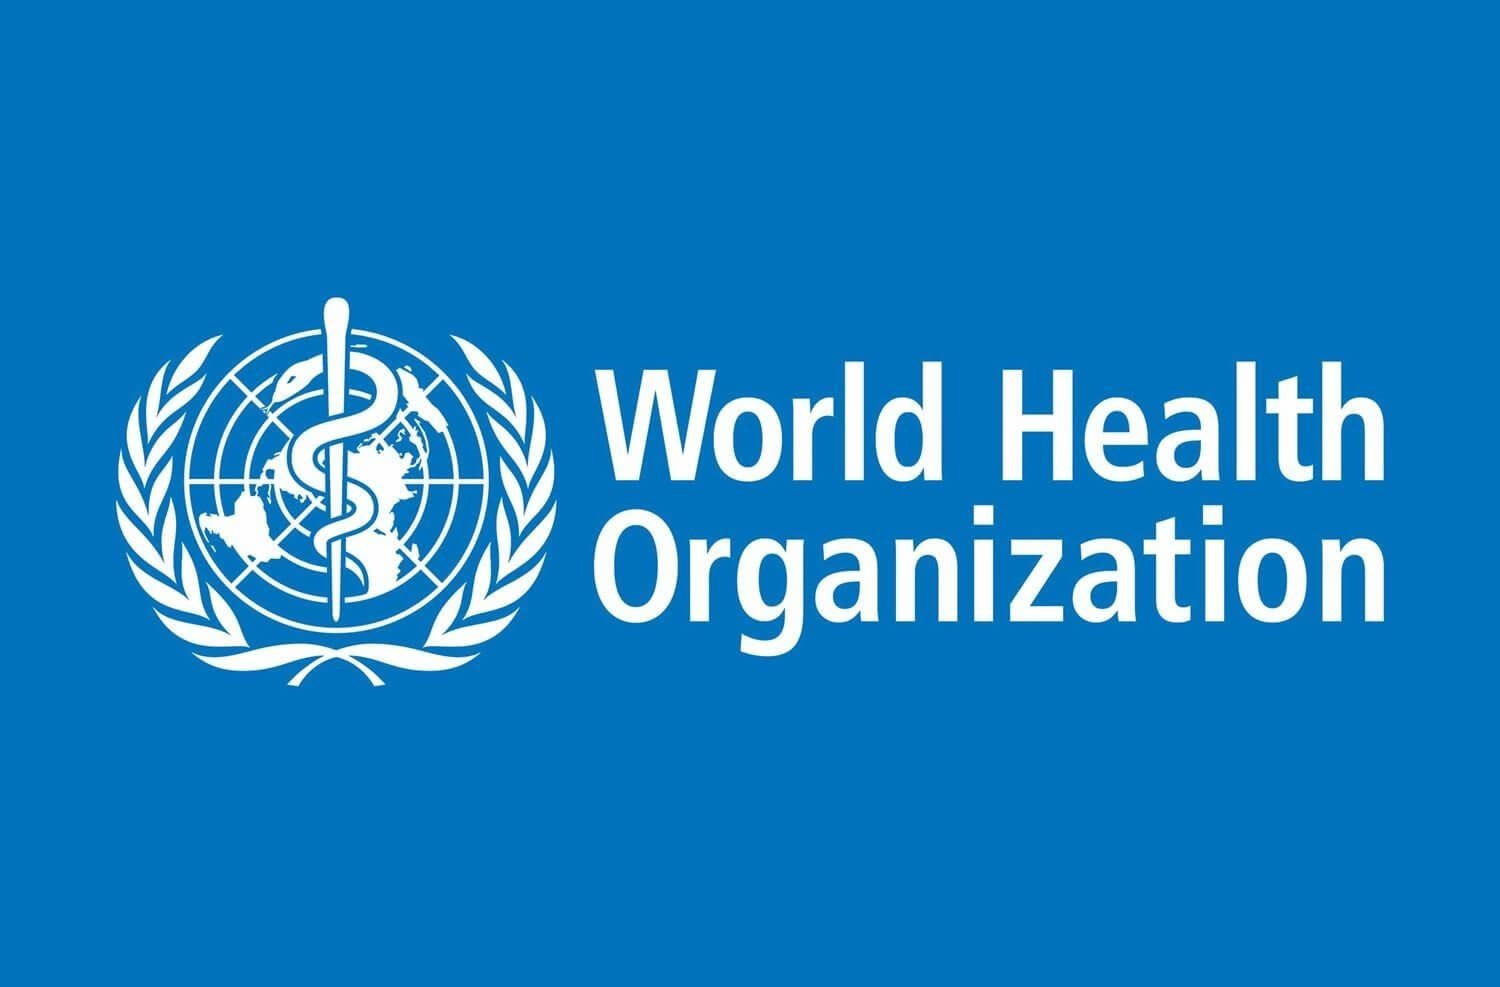  No approved vaccine yet in Nigeria for COVID-19, says WHO